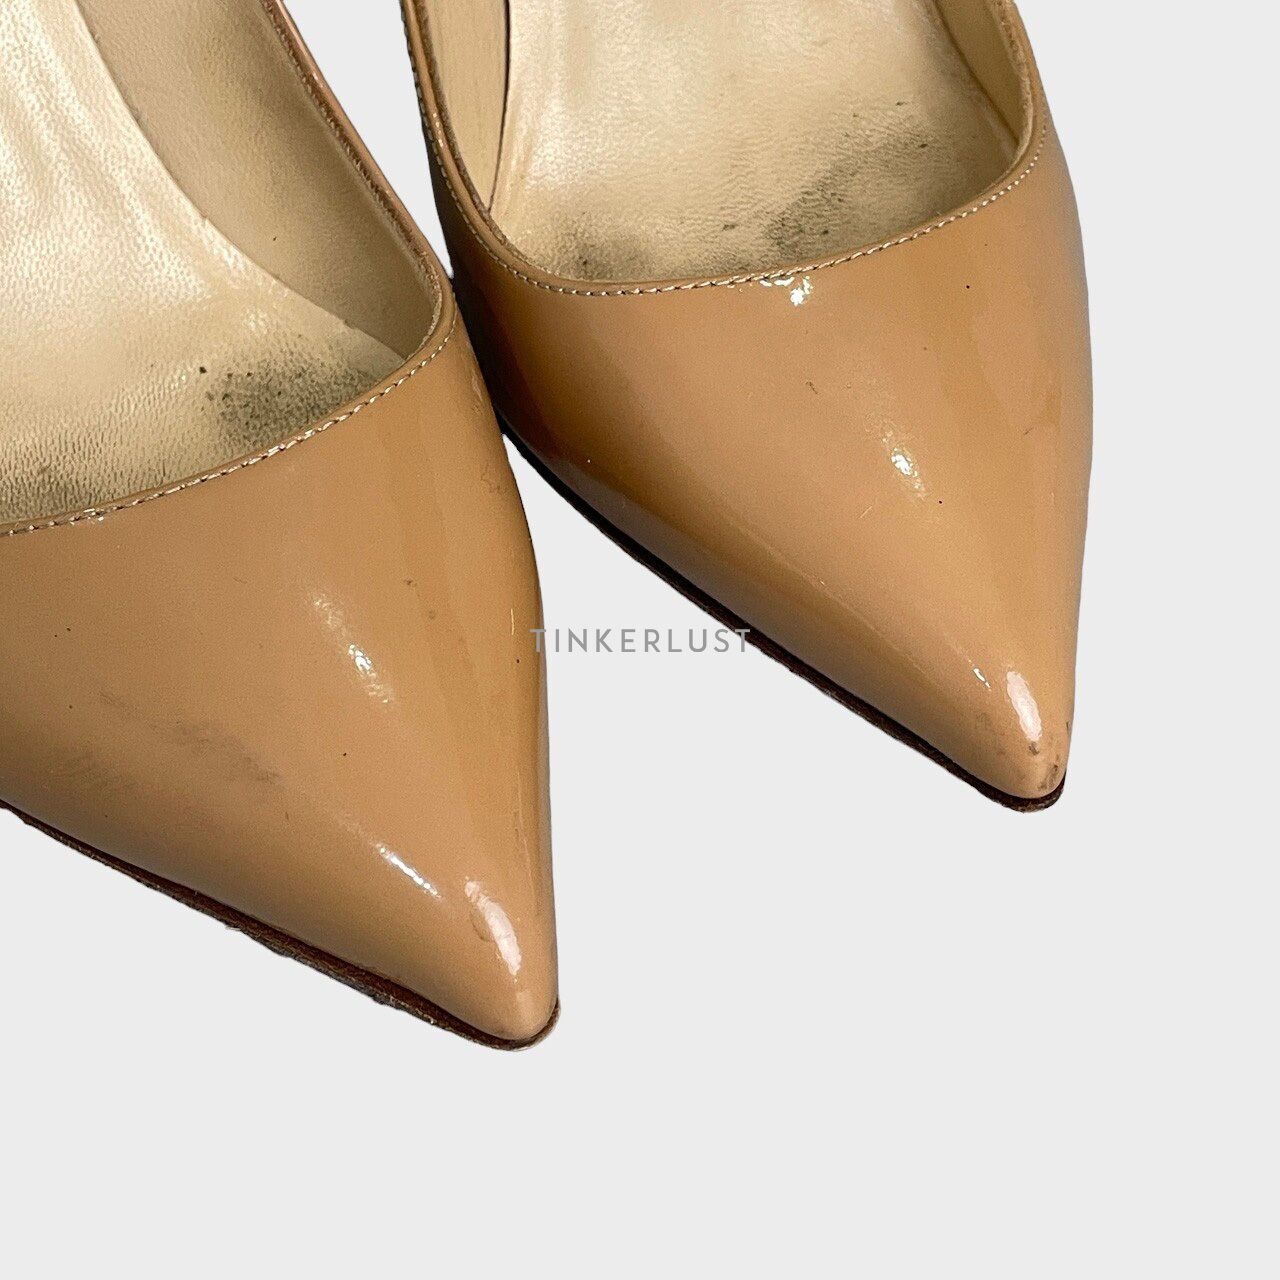 Christian Louboutin Pigalle Nude Patent Pumps